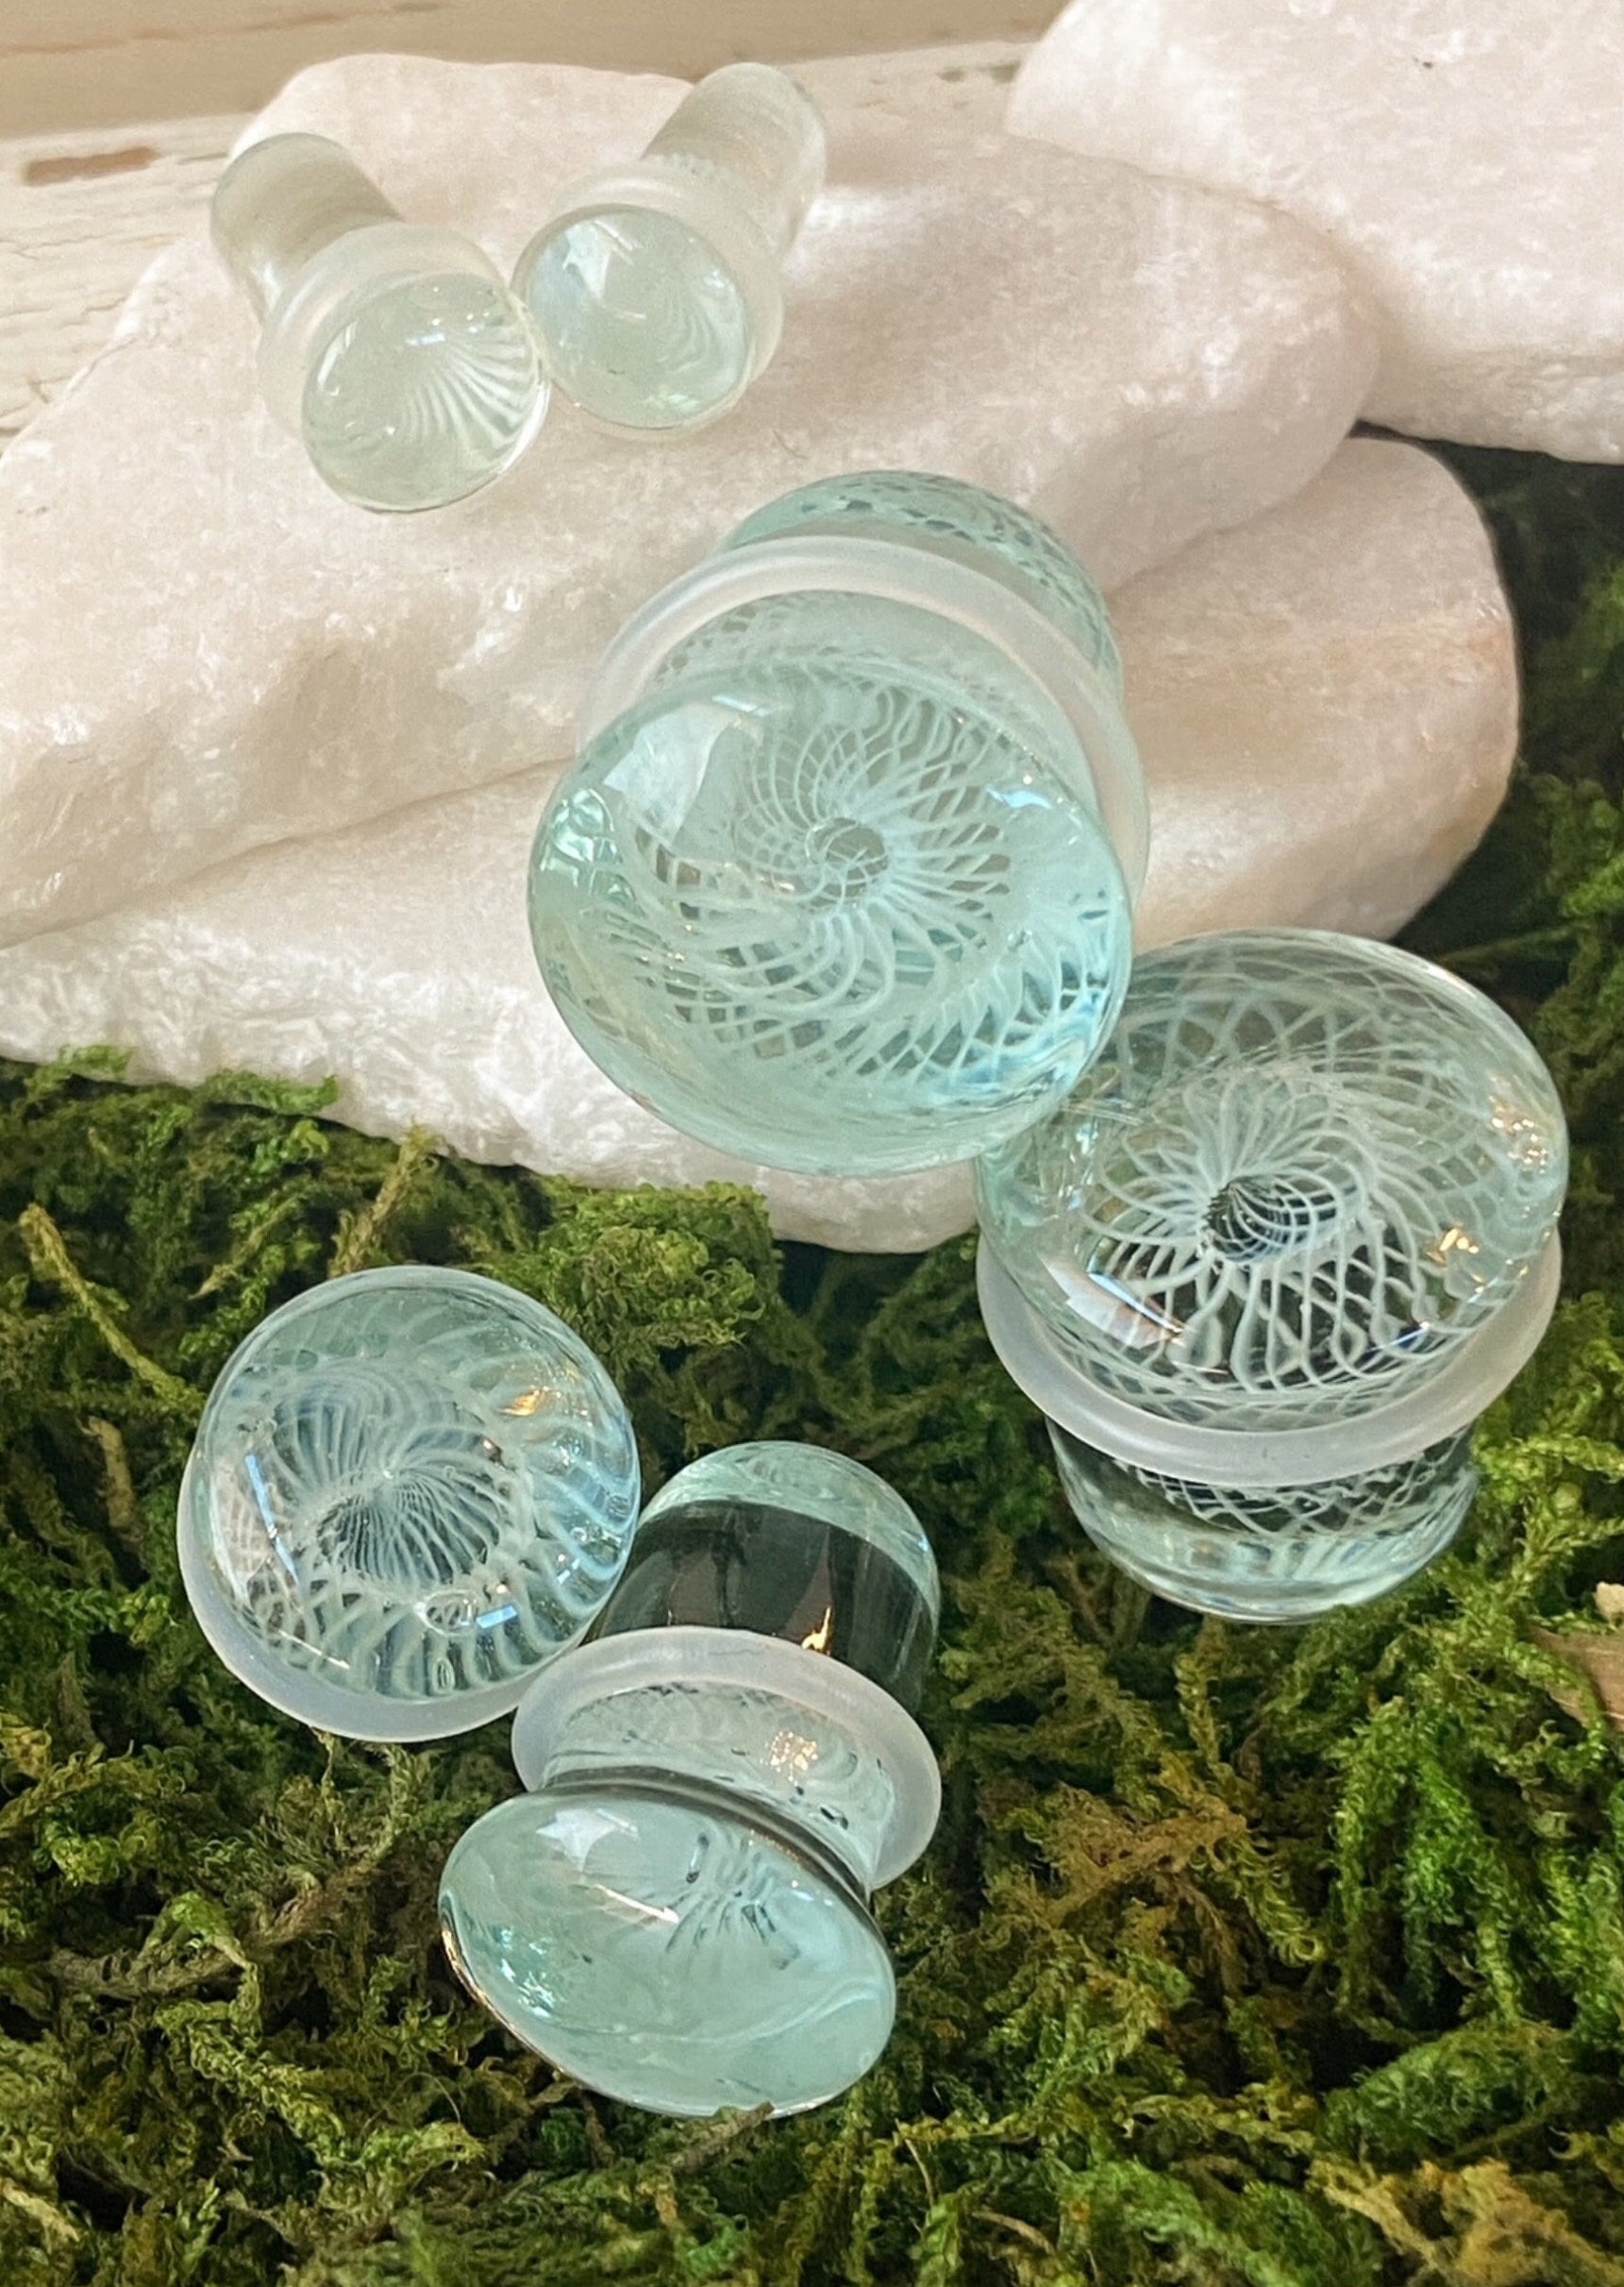 PAIR of Beautiful White Spiral Weave Design Pyrex Glass Single Flare Plugs with O-Rings - Gauges 2g (6mm) through 5/8" (16mm) available!